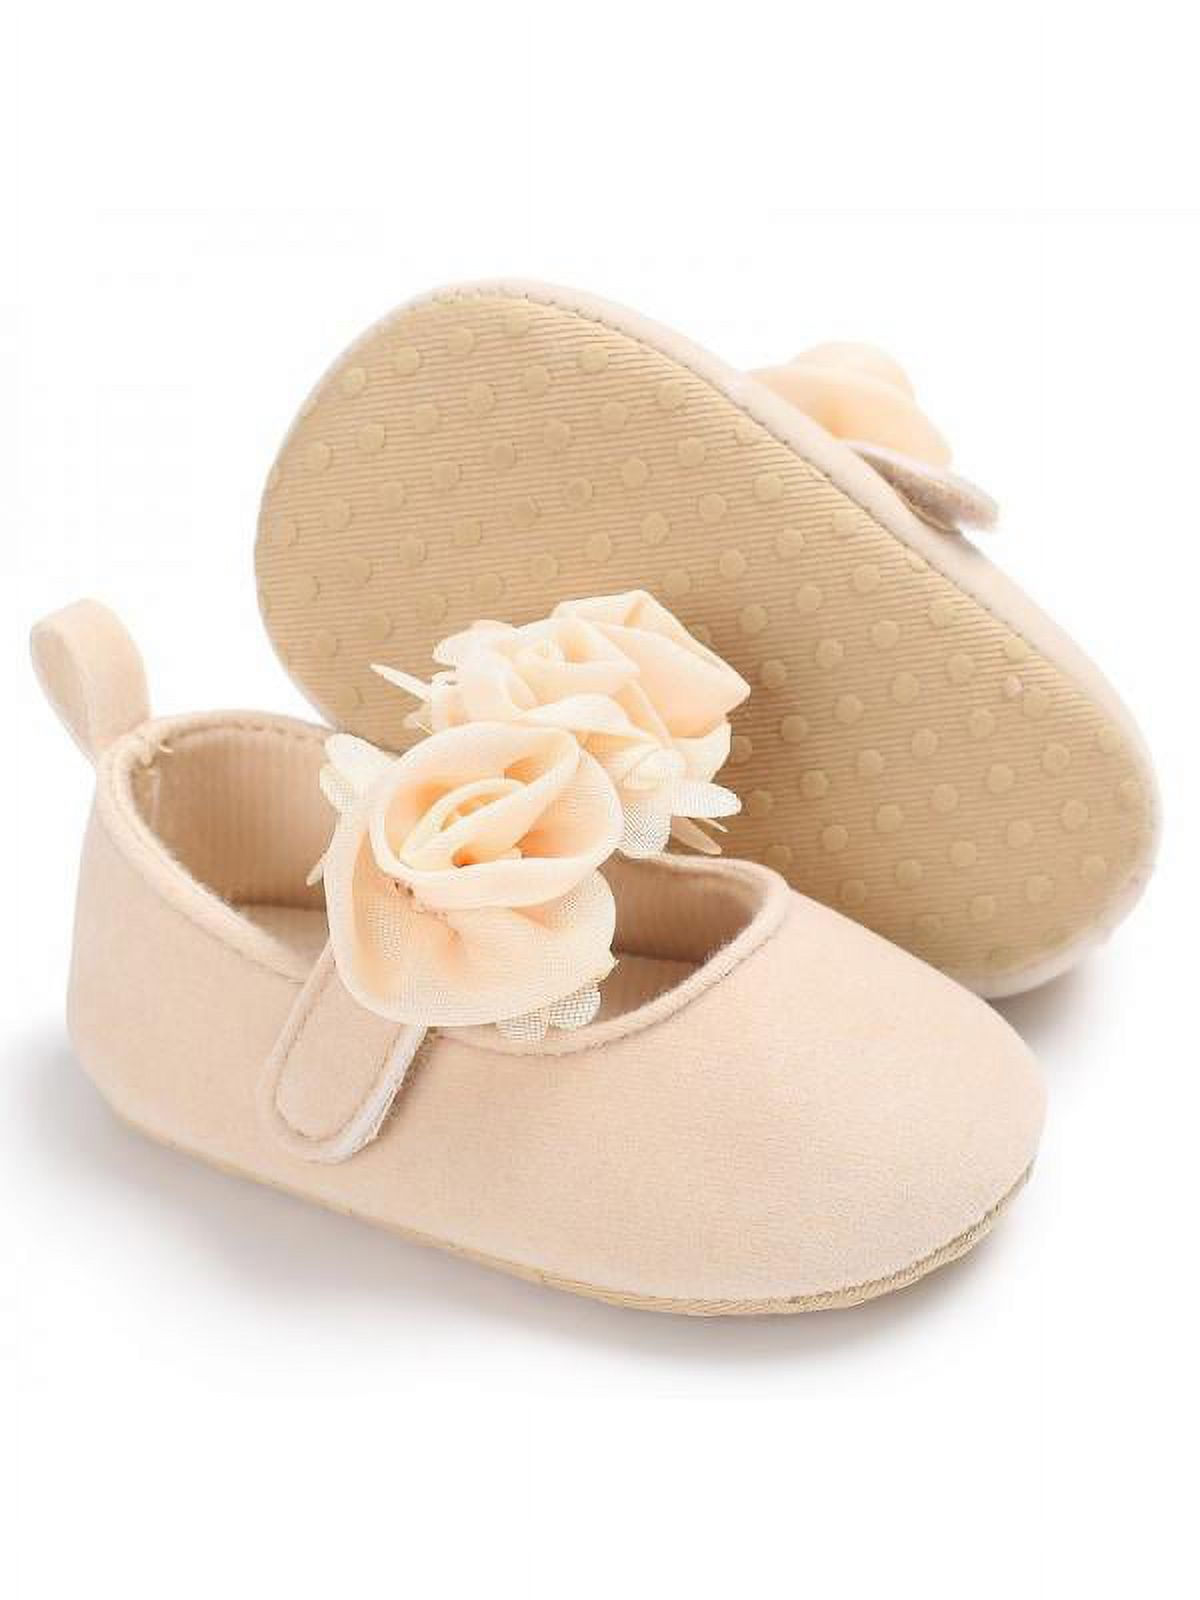 Lovely Kid Girls Princess Shoes Flowers Dance Shoes Suede Ballet Shoes Anti-slip Soft Sole Crib Hook & Loop Shoes (Toddler/Little Baby Girls) - image 3 of 7